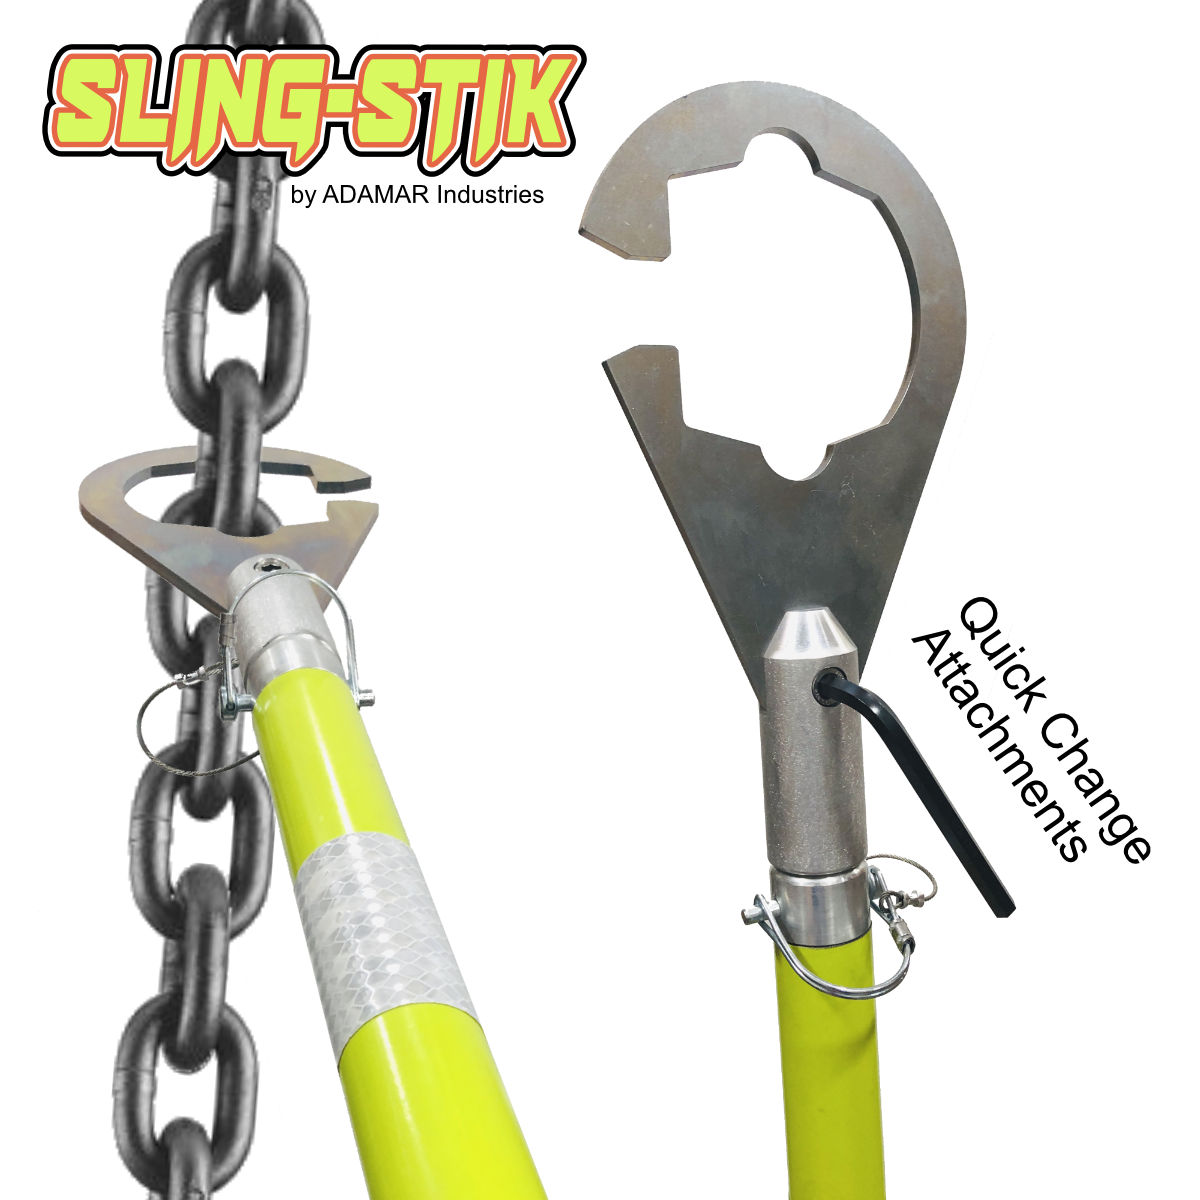 Sling-Stik - Rigid, Strong and Versatile Suspended Load Control Hand Safety  Tool Used To Grab Chain, Wire Rope or Synthetic Slings and other Hard Points